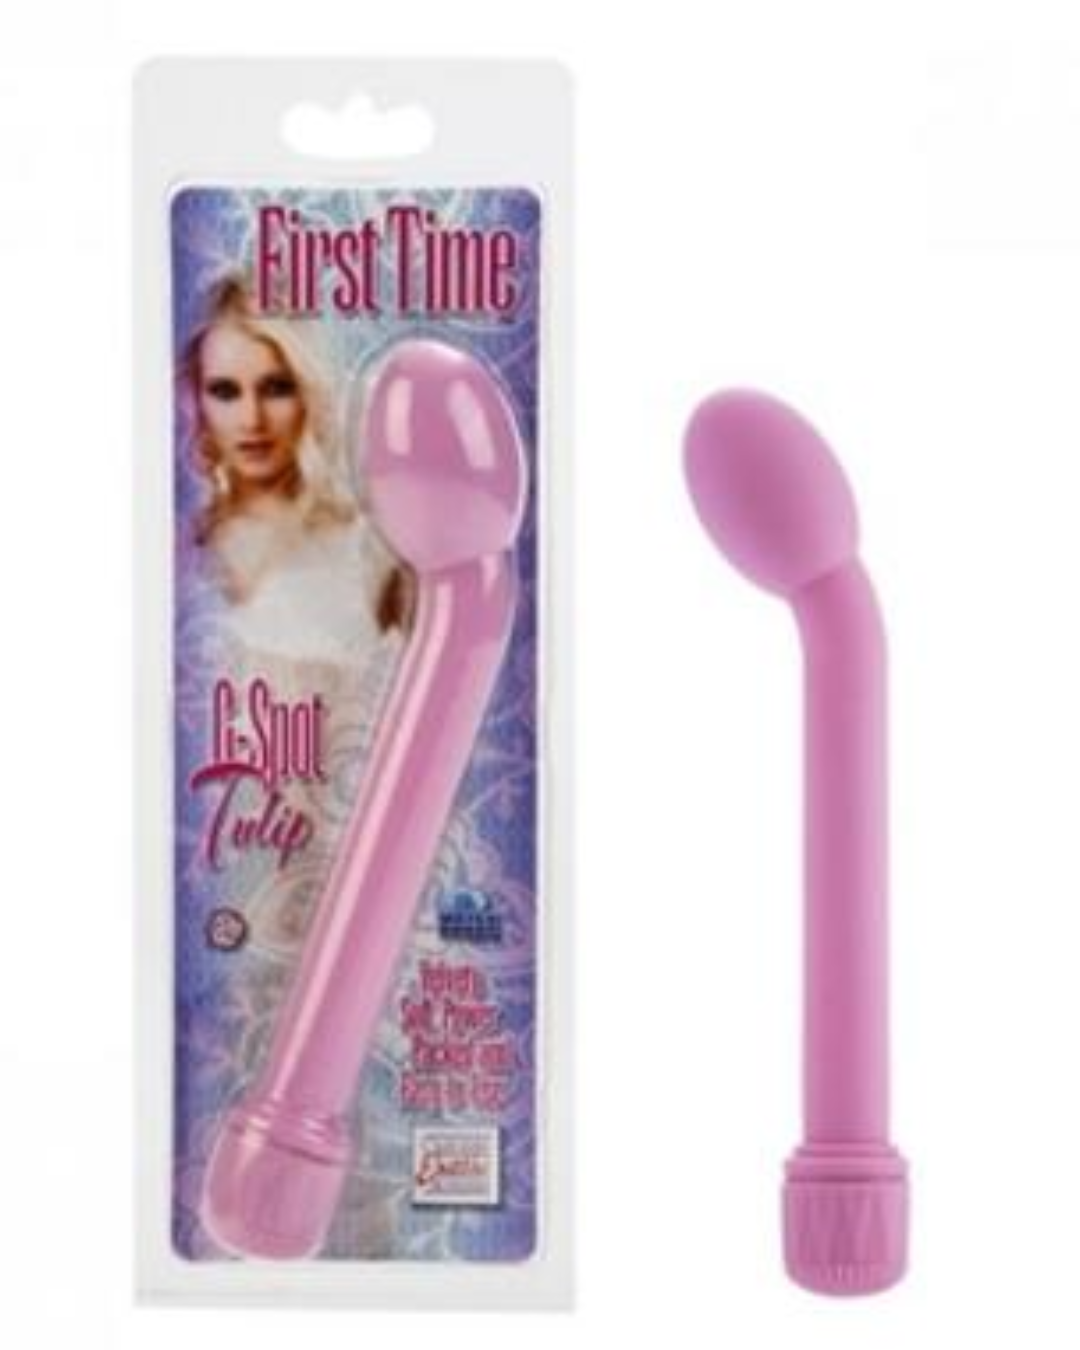 First Time G-Spot Tulip Vibrator by Cal Exotics - Assorted Colors pink with package